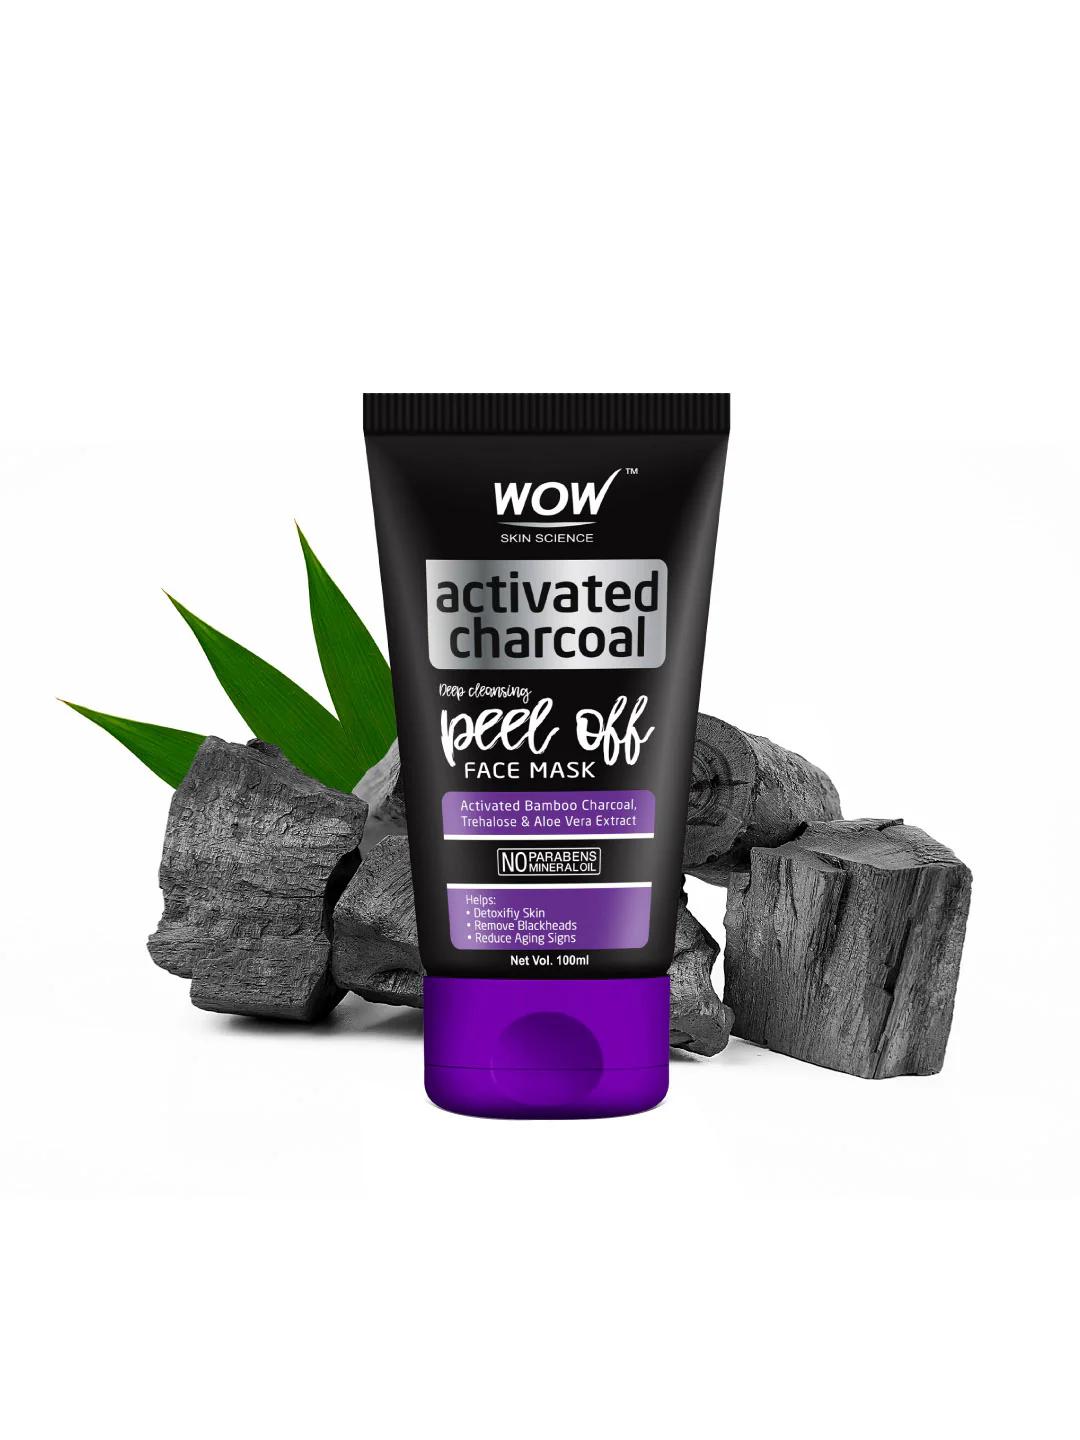 Wow Skin Science Activated Charcoal Peel Off Mask